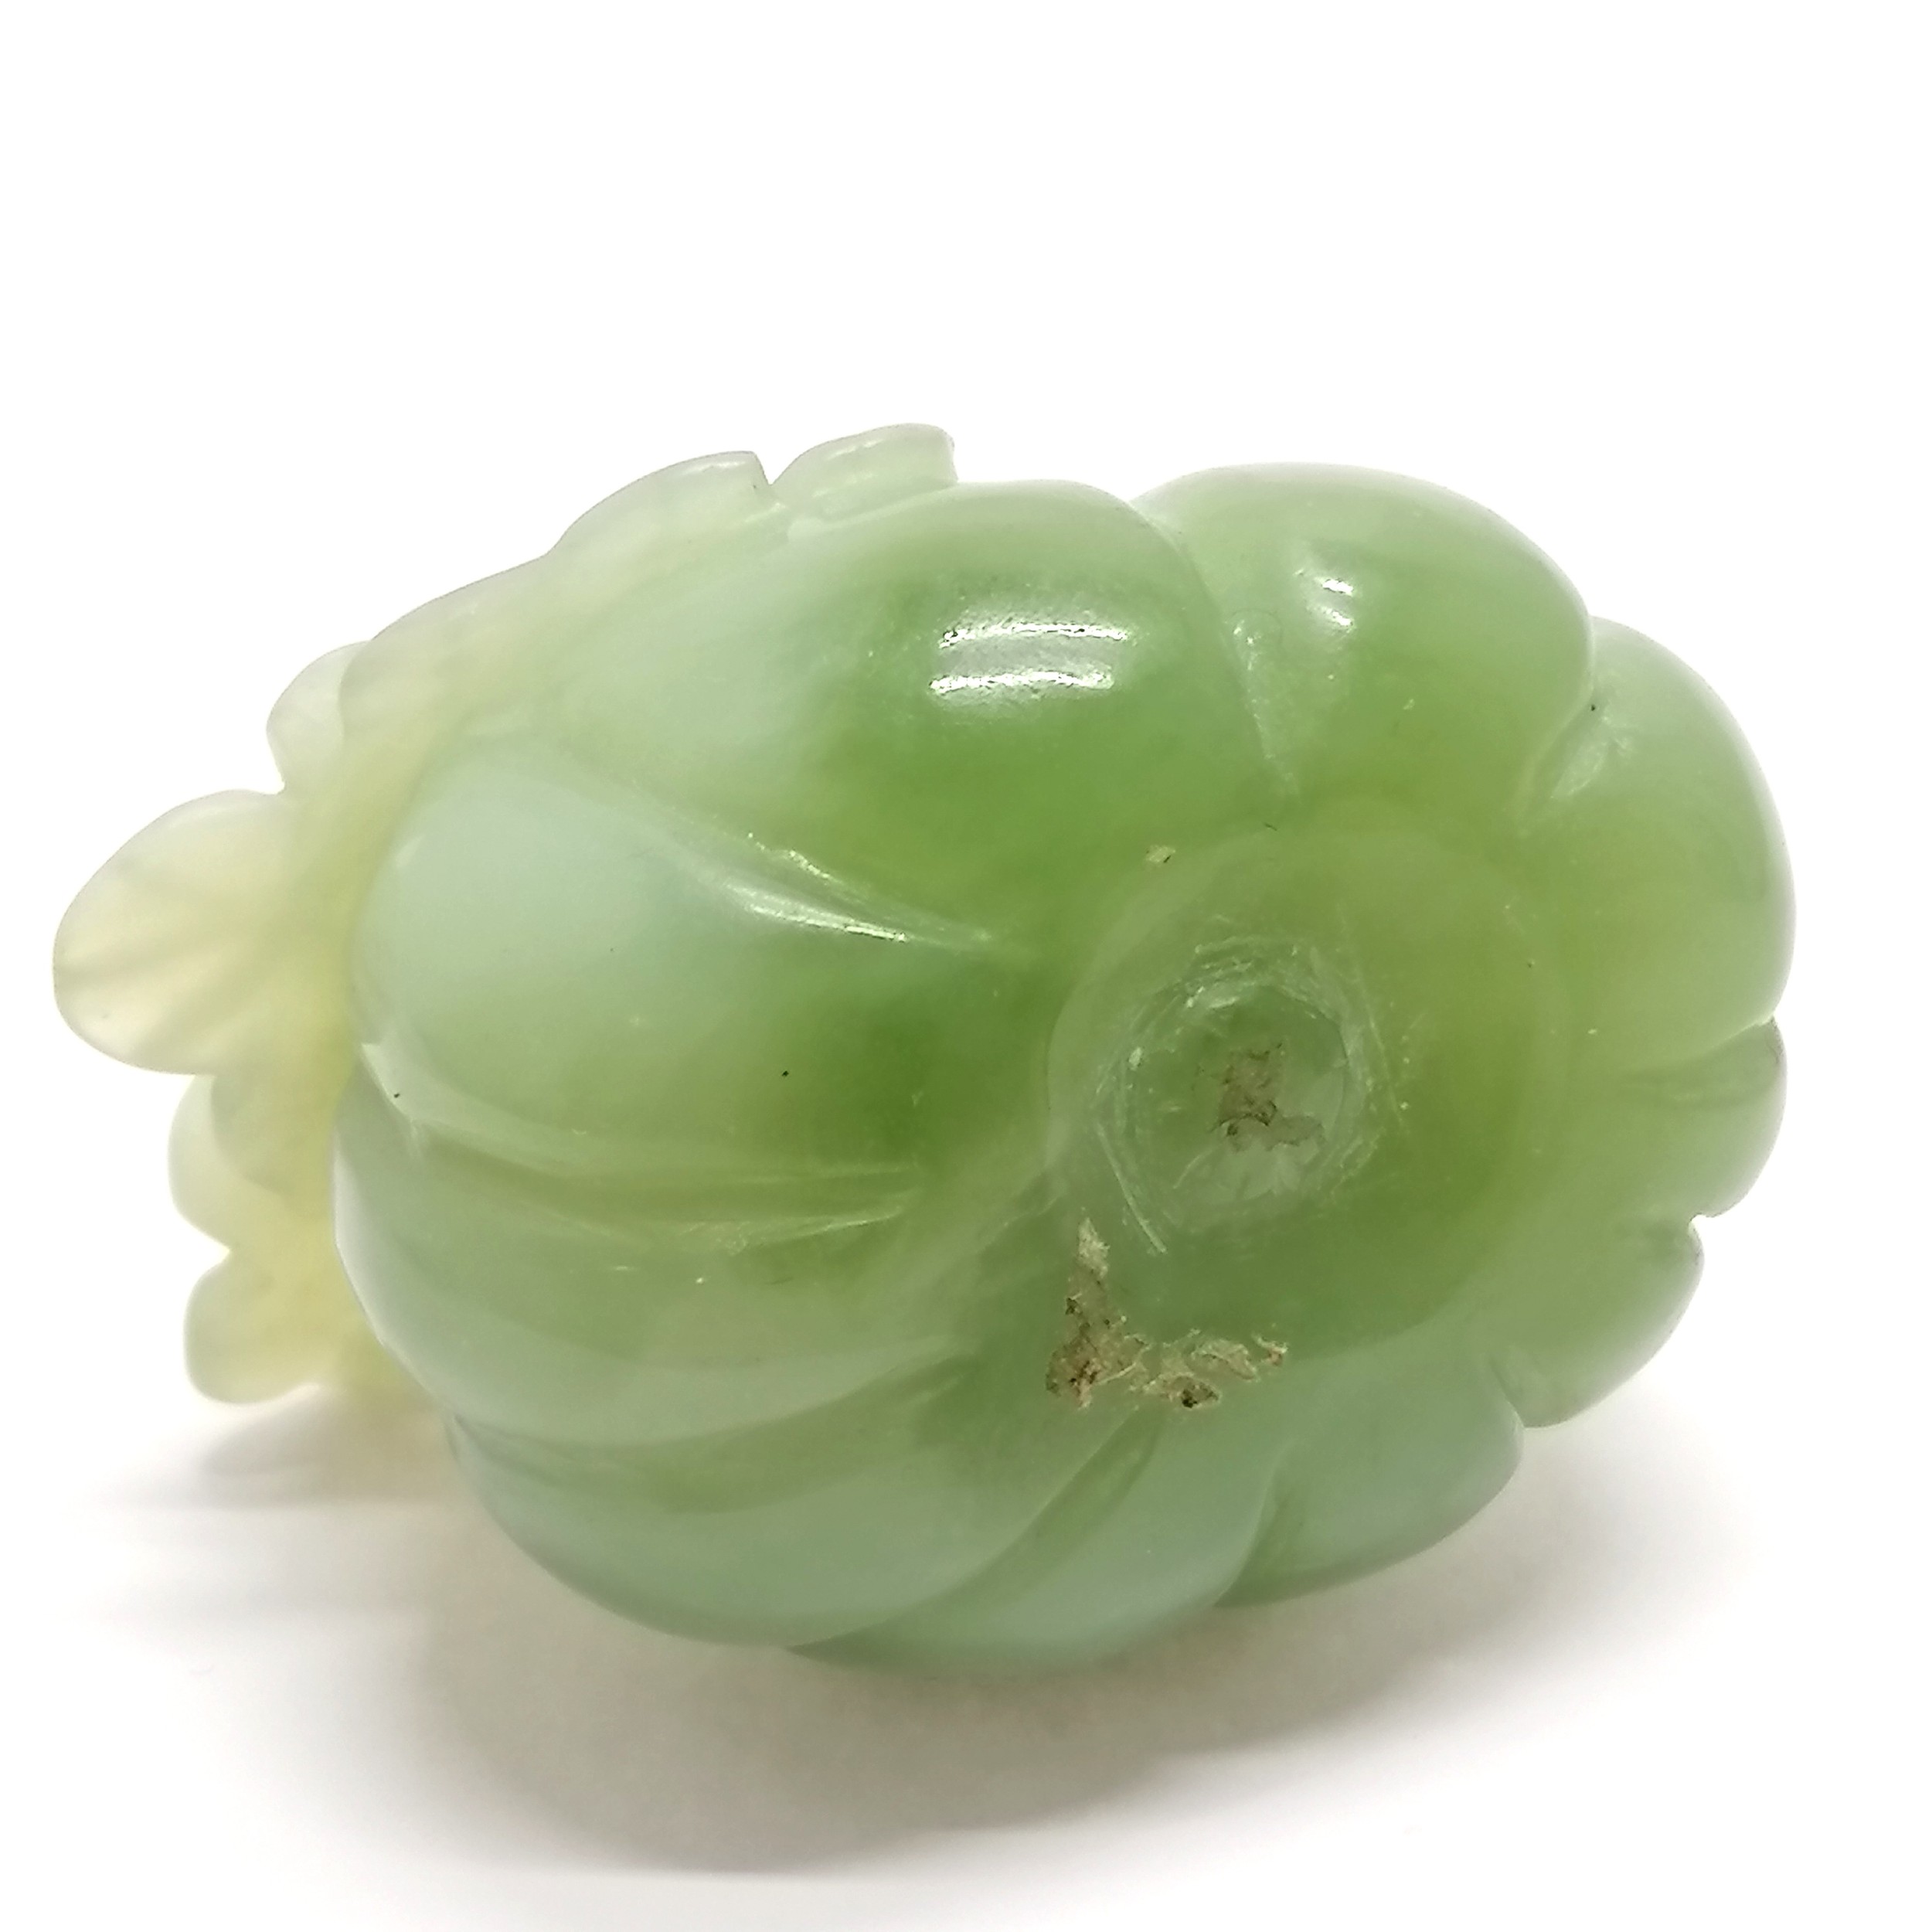 Oriental hand carved hardstone jade fruit with leaves - 4.5cm high & no obvious damage - Image 2 of 5